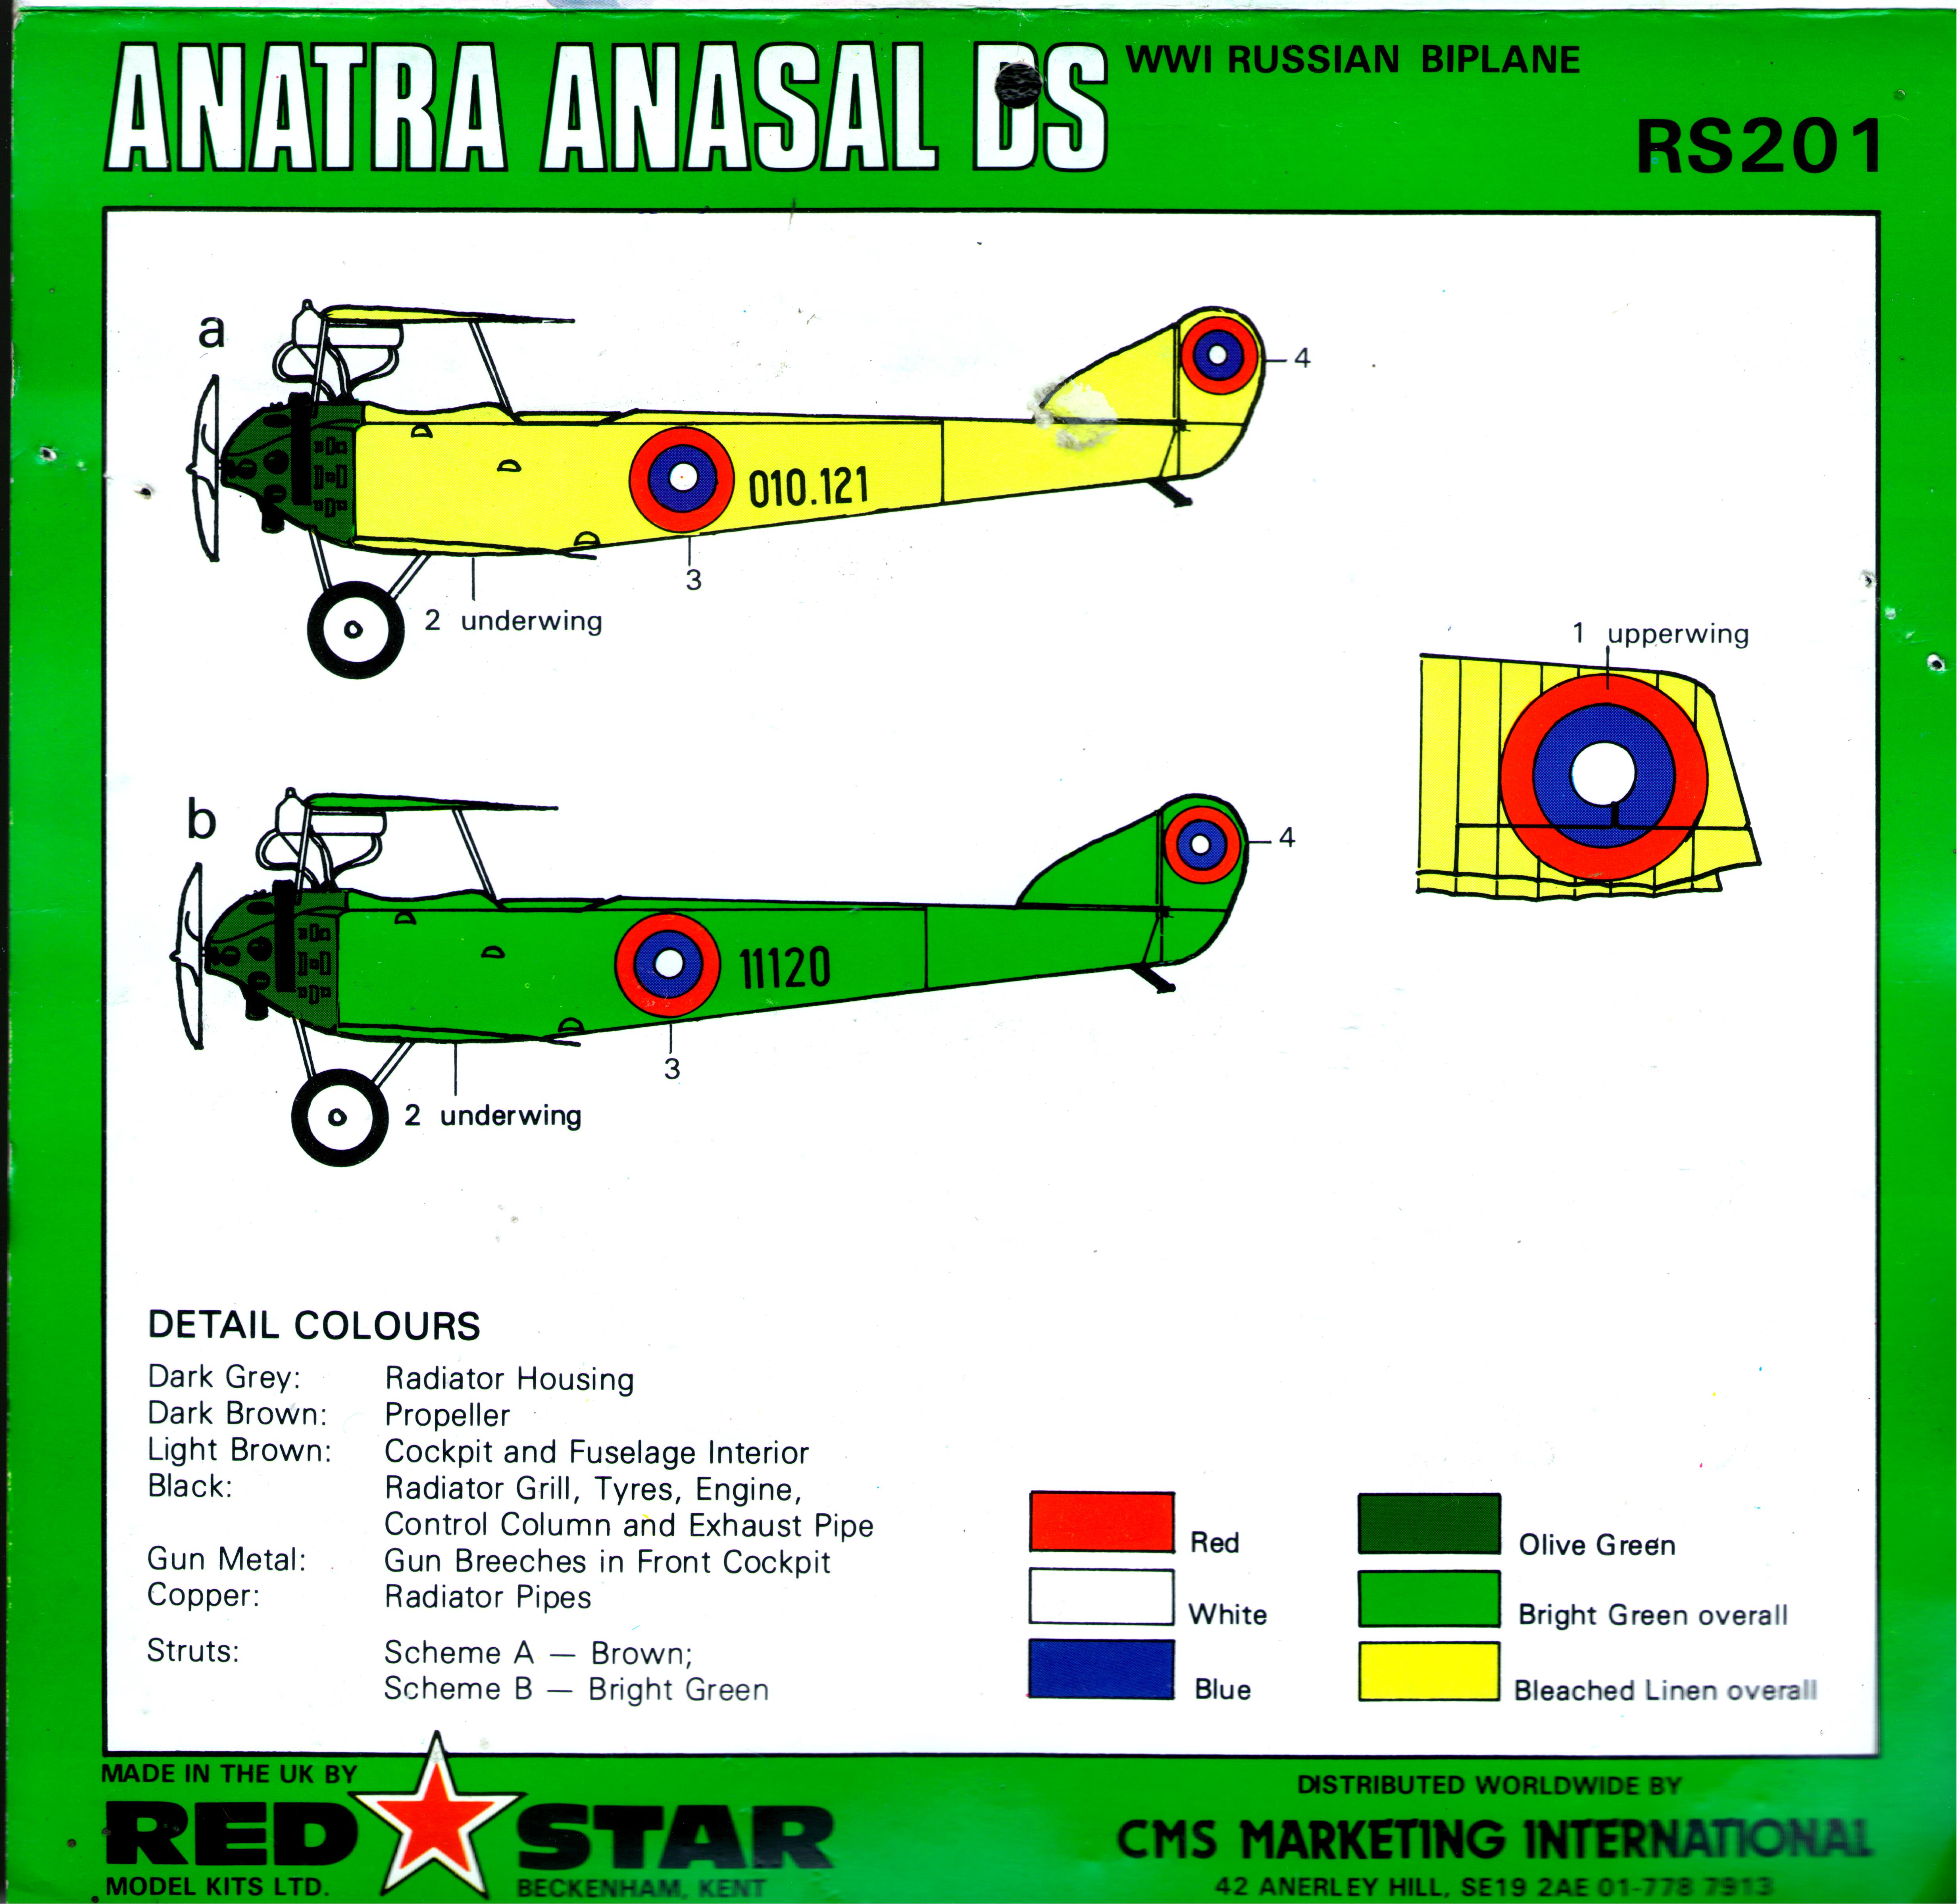 Red Star RS201 Anatra Anasal DS, Red Star Model Kits Ltd, 1984 Colour painting guide